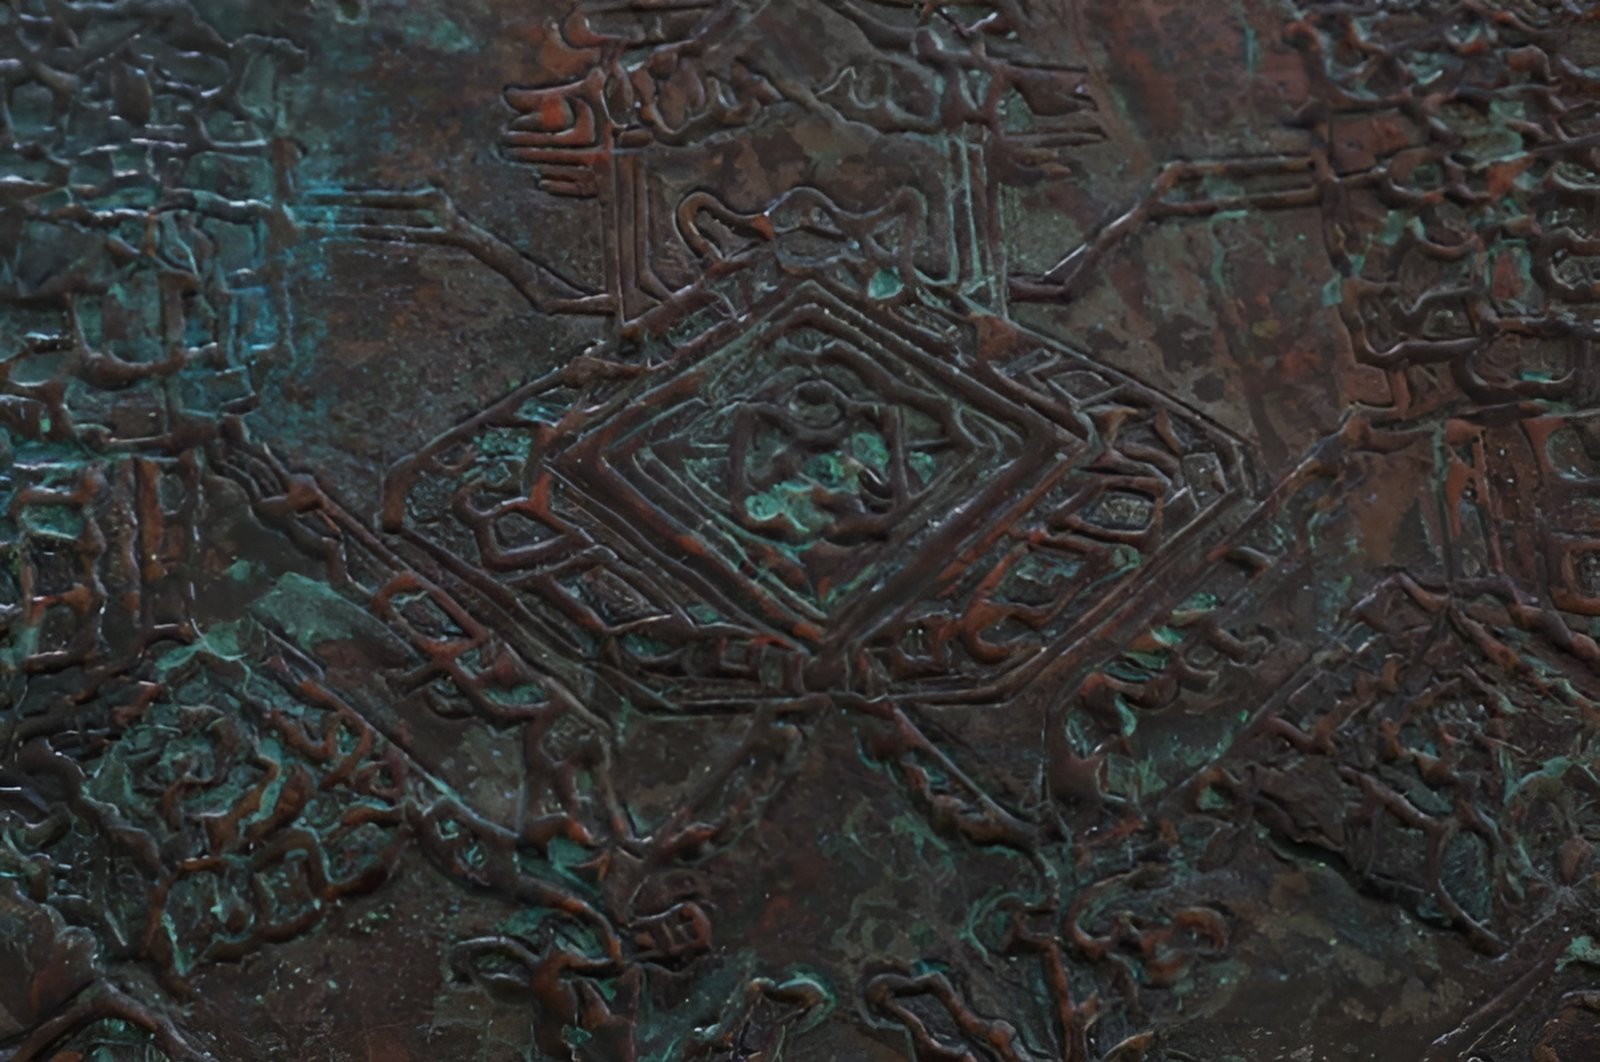 Detailed section of the copper plate by Thomas Usta, Istanbul, Türkiye, Oct. 13, 2022. (Photo courtesy of Gate 27)